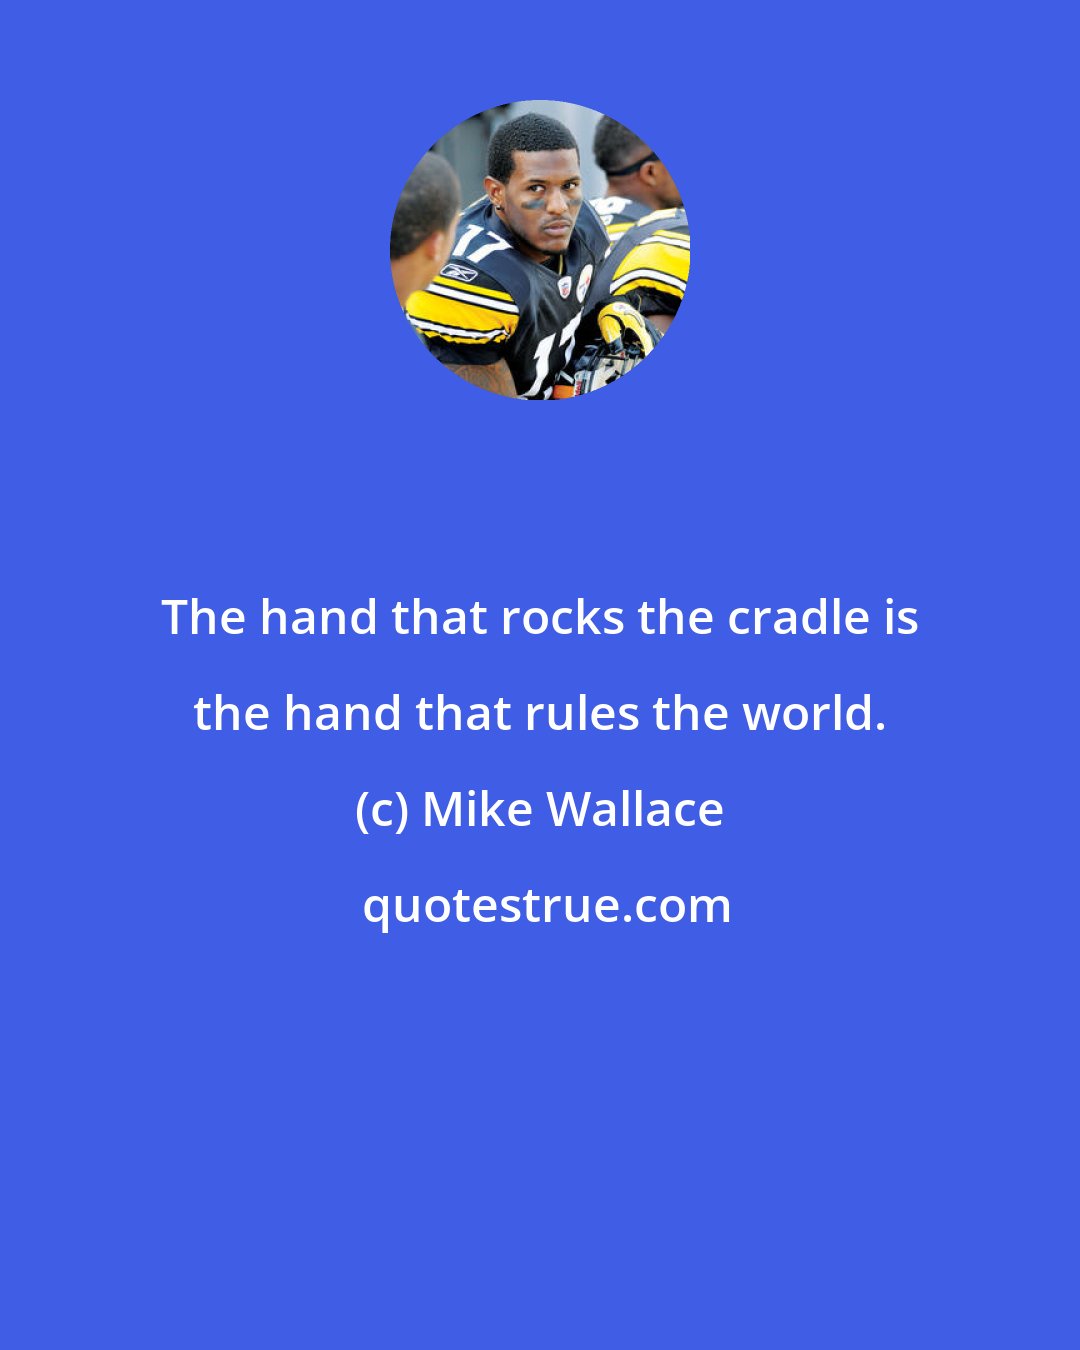 Mike Wallace: The hand that rocks the cradle is the hand that rules the world.